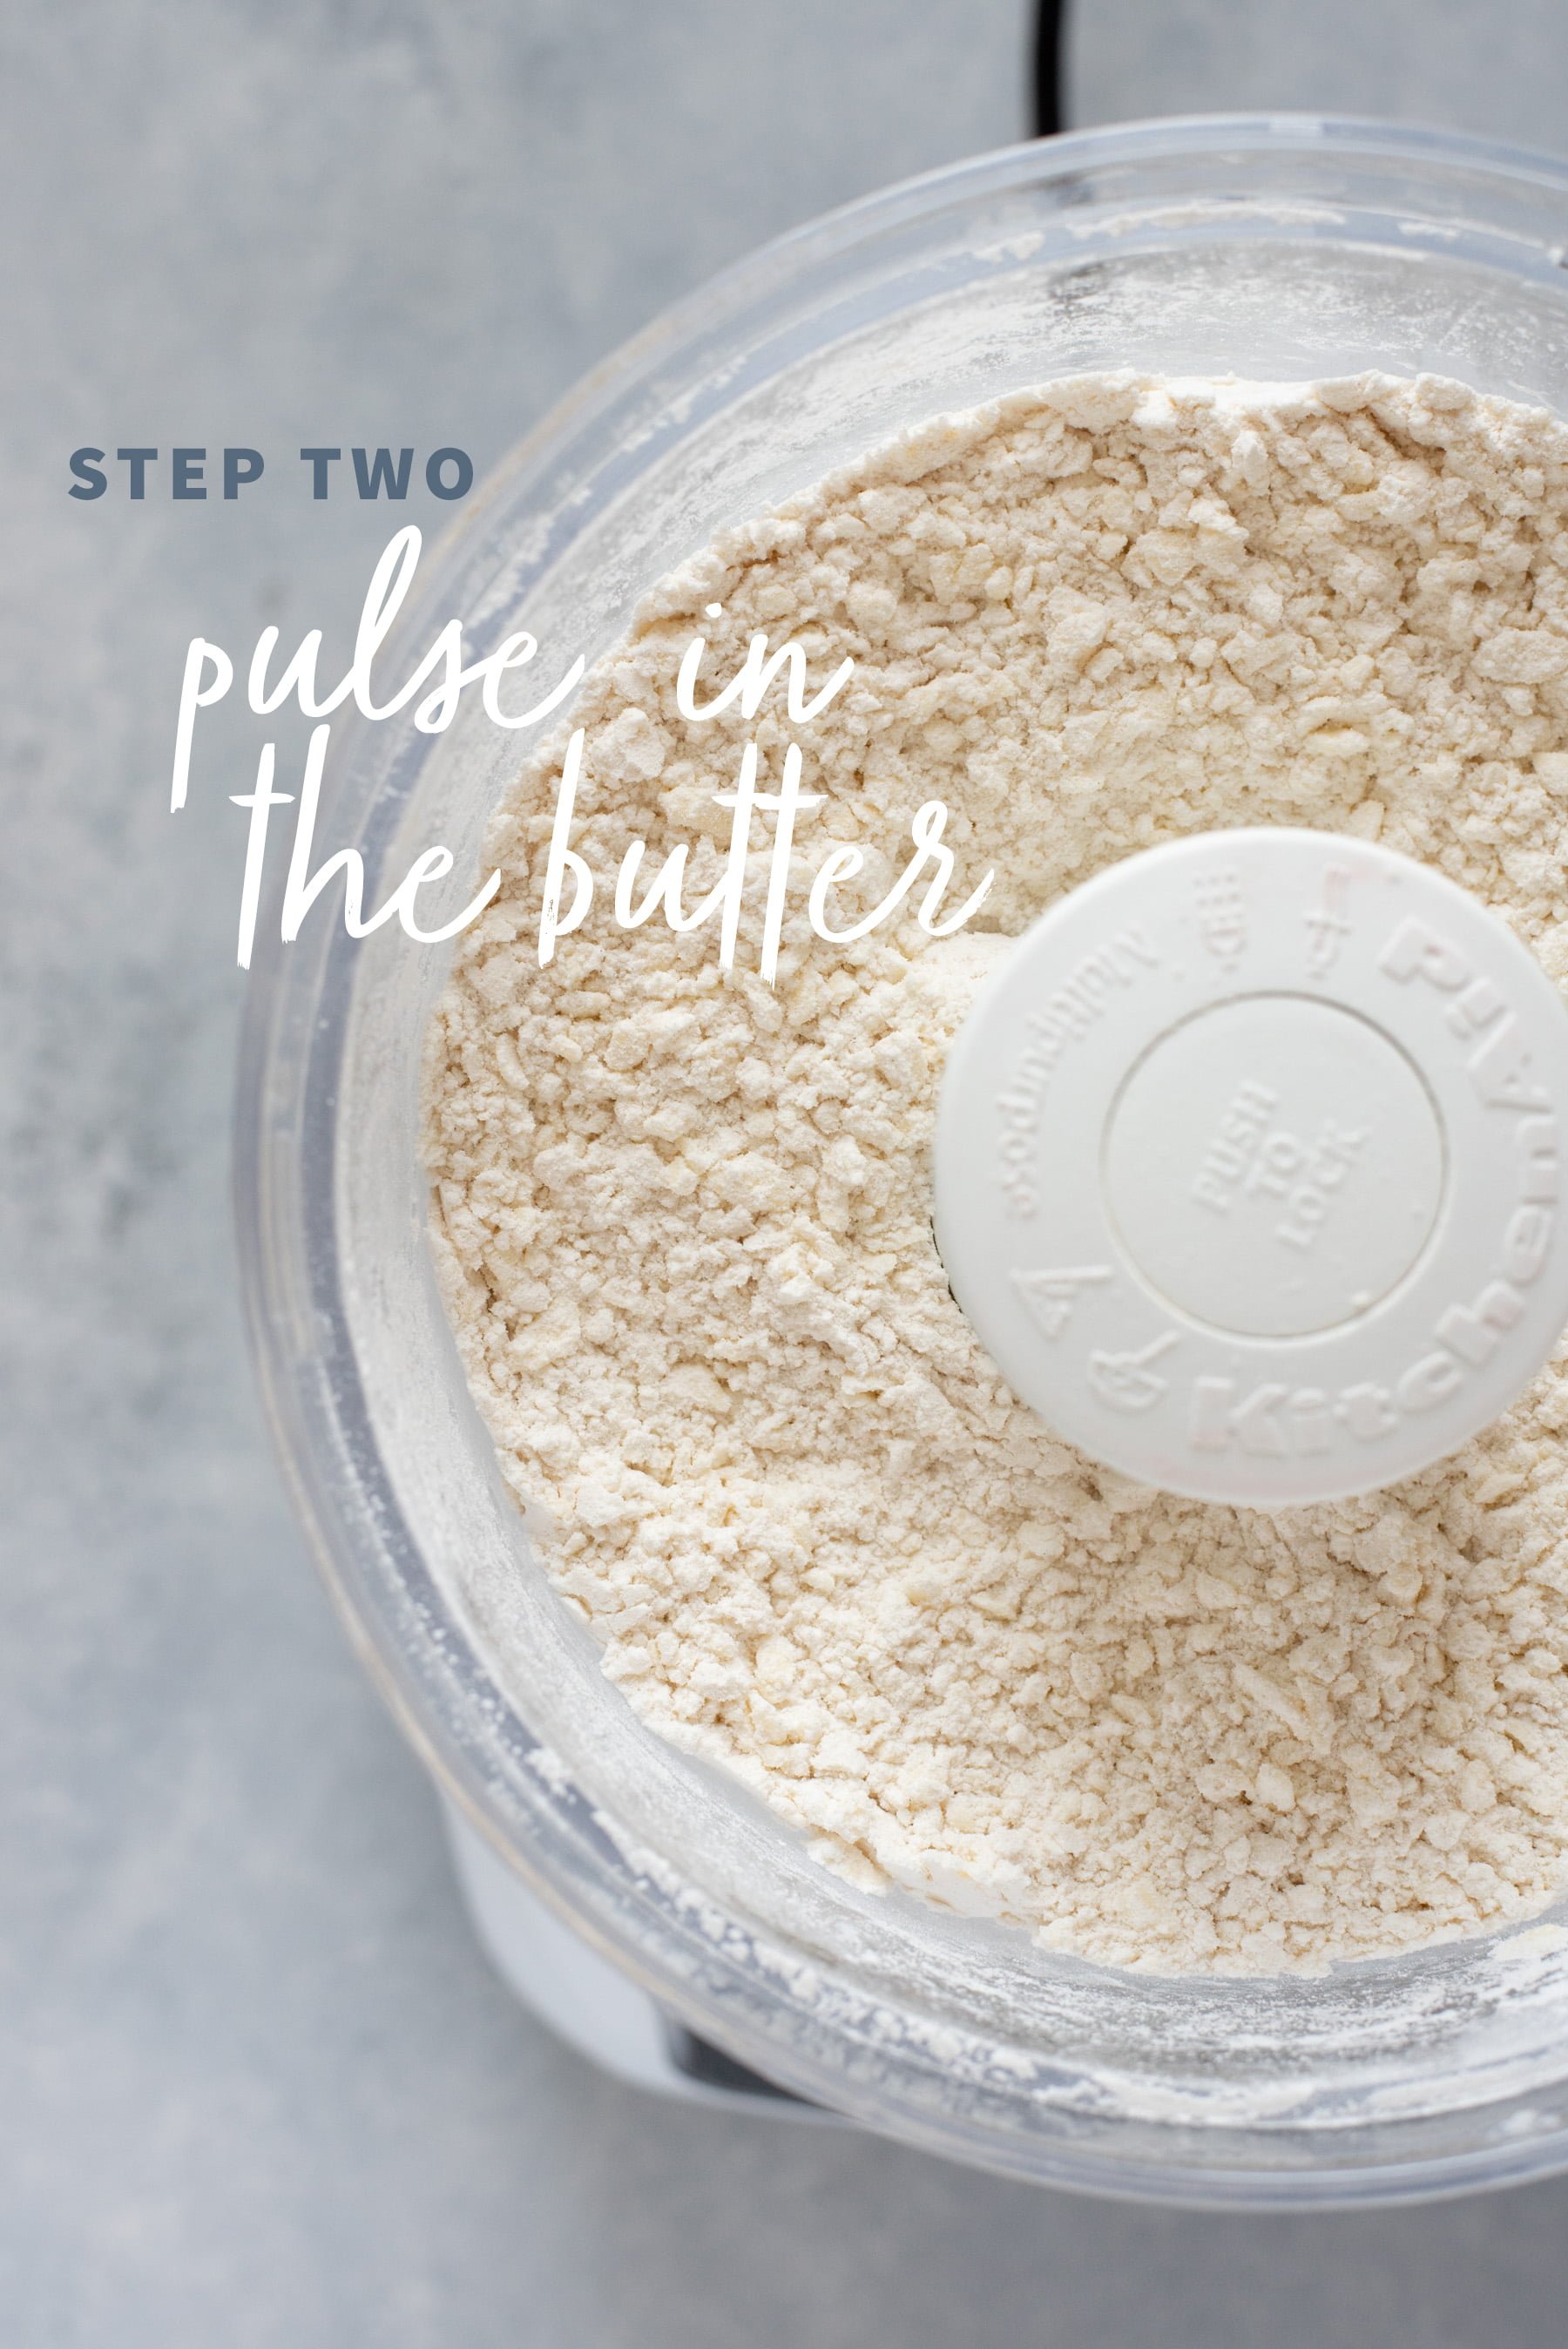 Pulsing butter into the dry ingredients for pie crust dough in the bowl of a food processor